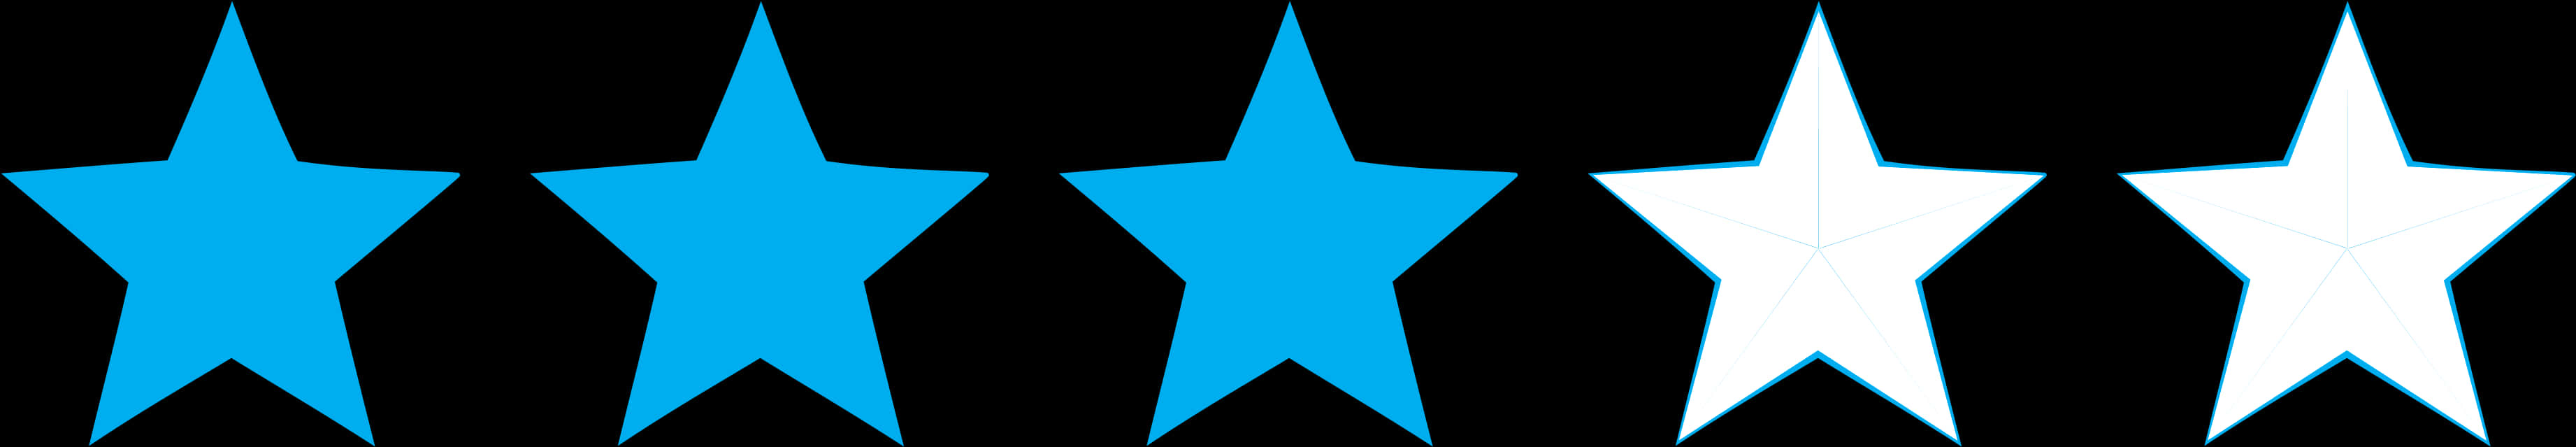 Five Star Rating Gradient PNG image